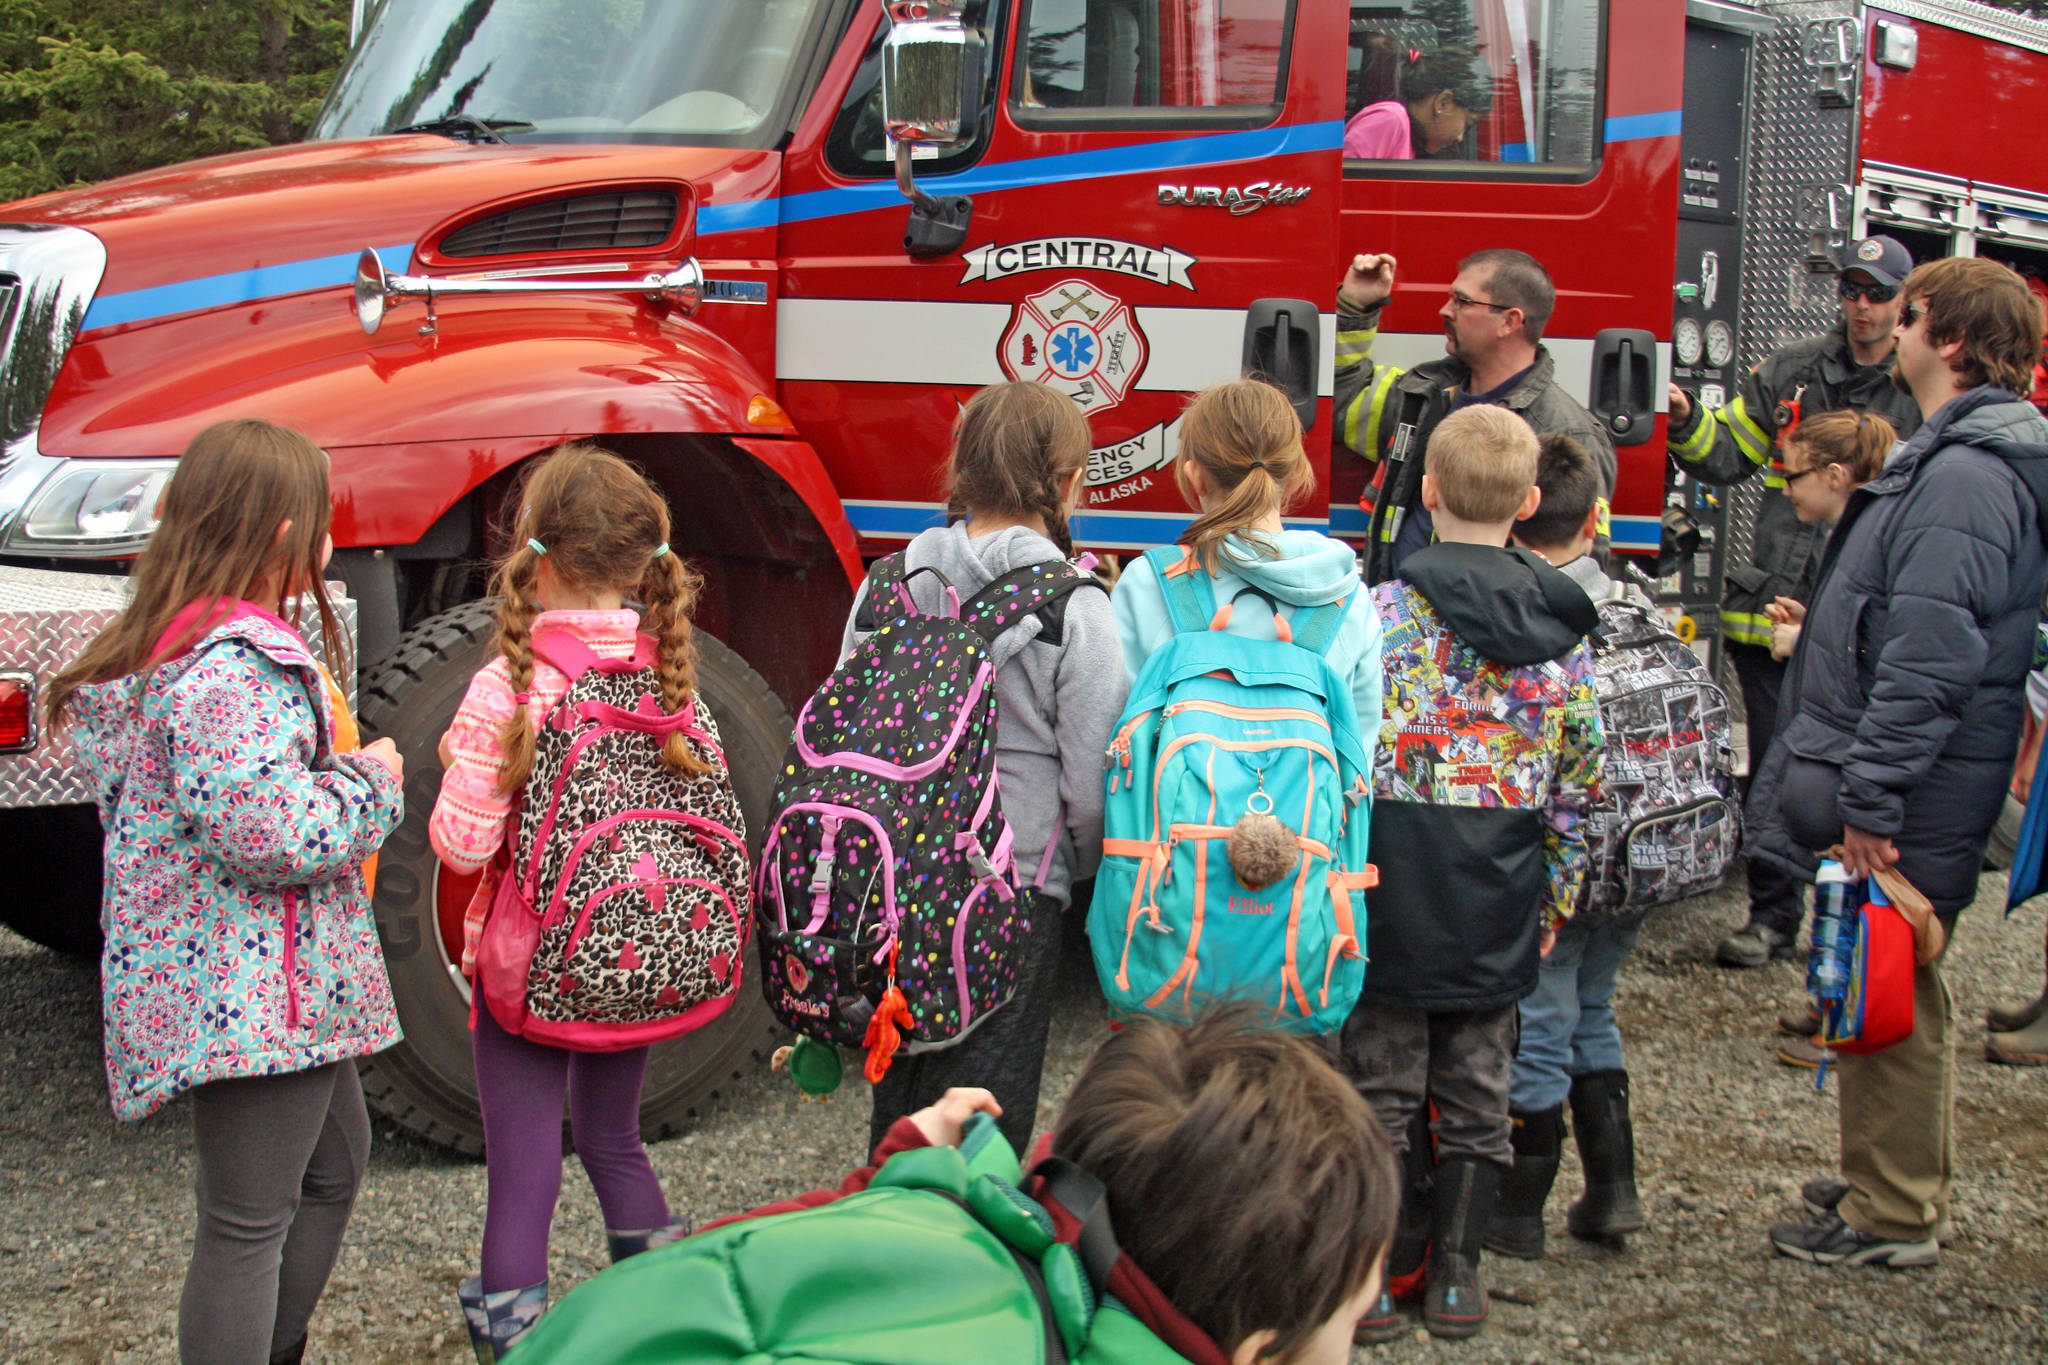 Students wait to get a look inside a fire engine at the 18th Annual Kenai Peninsula Salmon Celebration at Johnson Lake State Recreation Site in Kasilof. Central Emergency Services was one of the many community organizations that participated in the event, which featured hands-on activity booths and demonstration areas. (Photo by Erin Thompson/Peninsula Clarion)